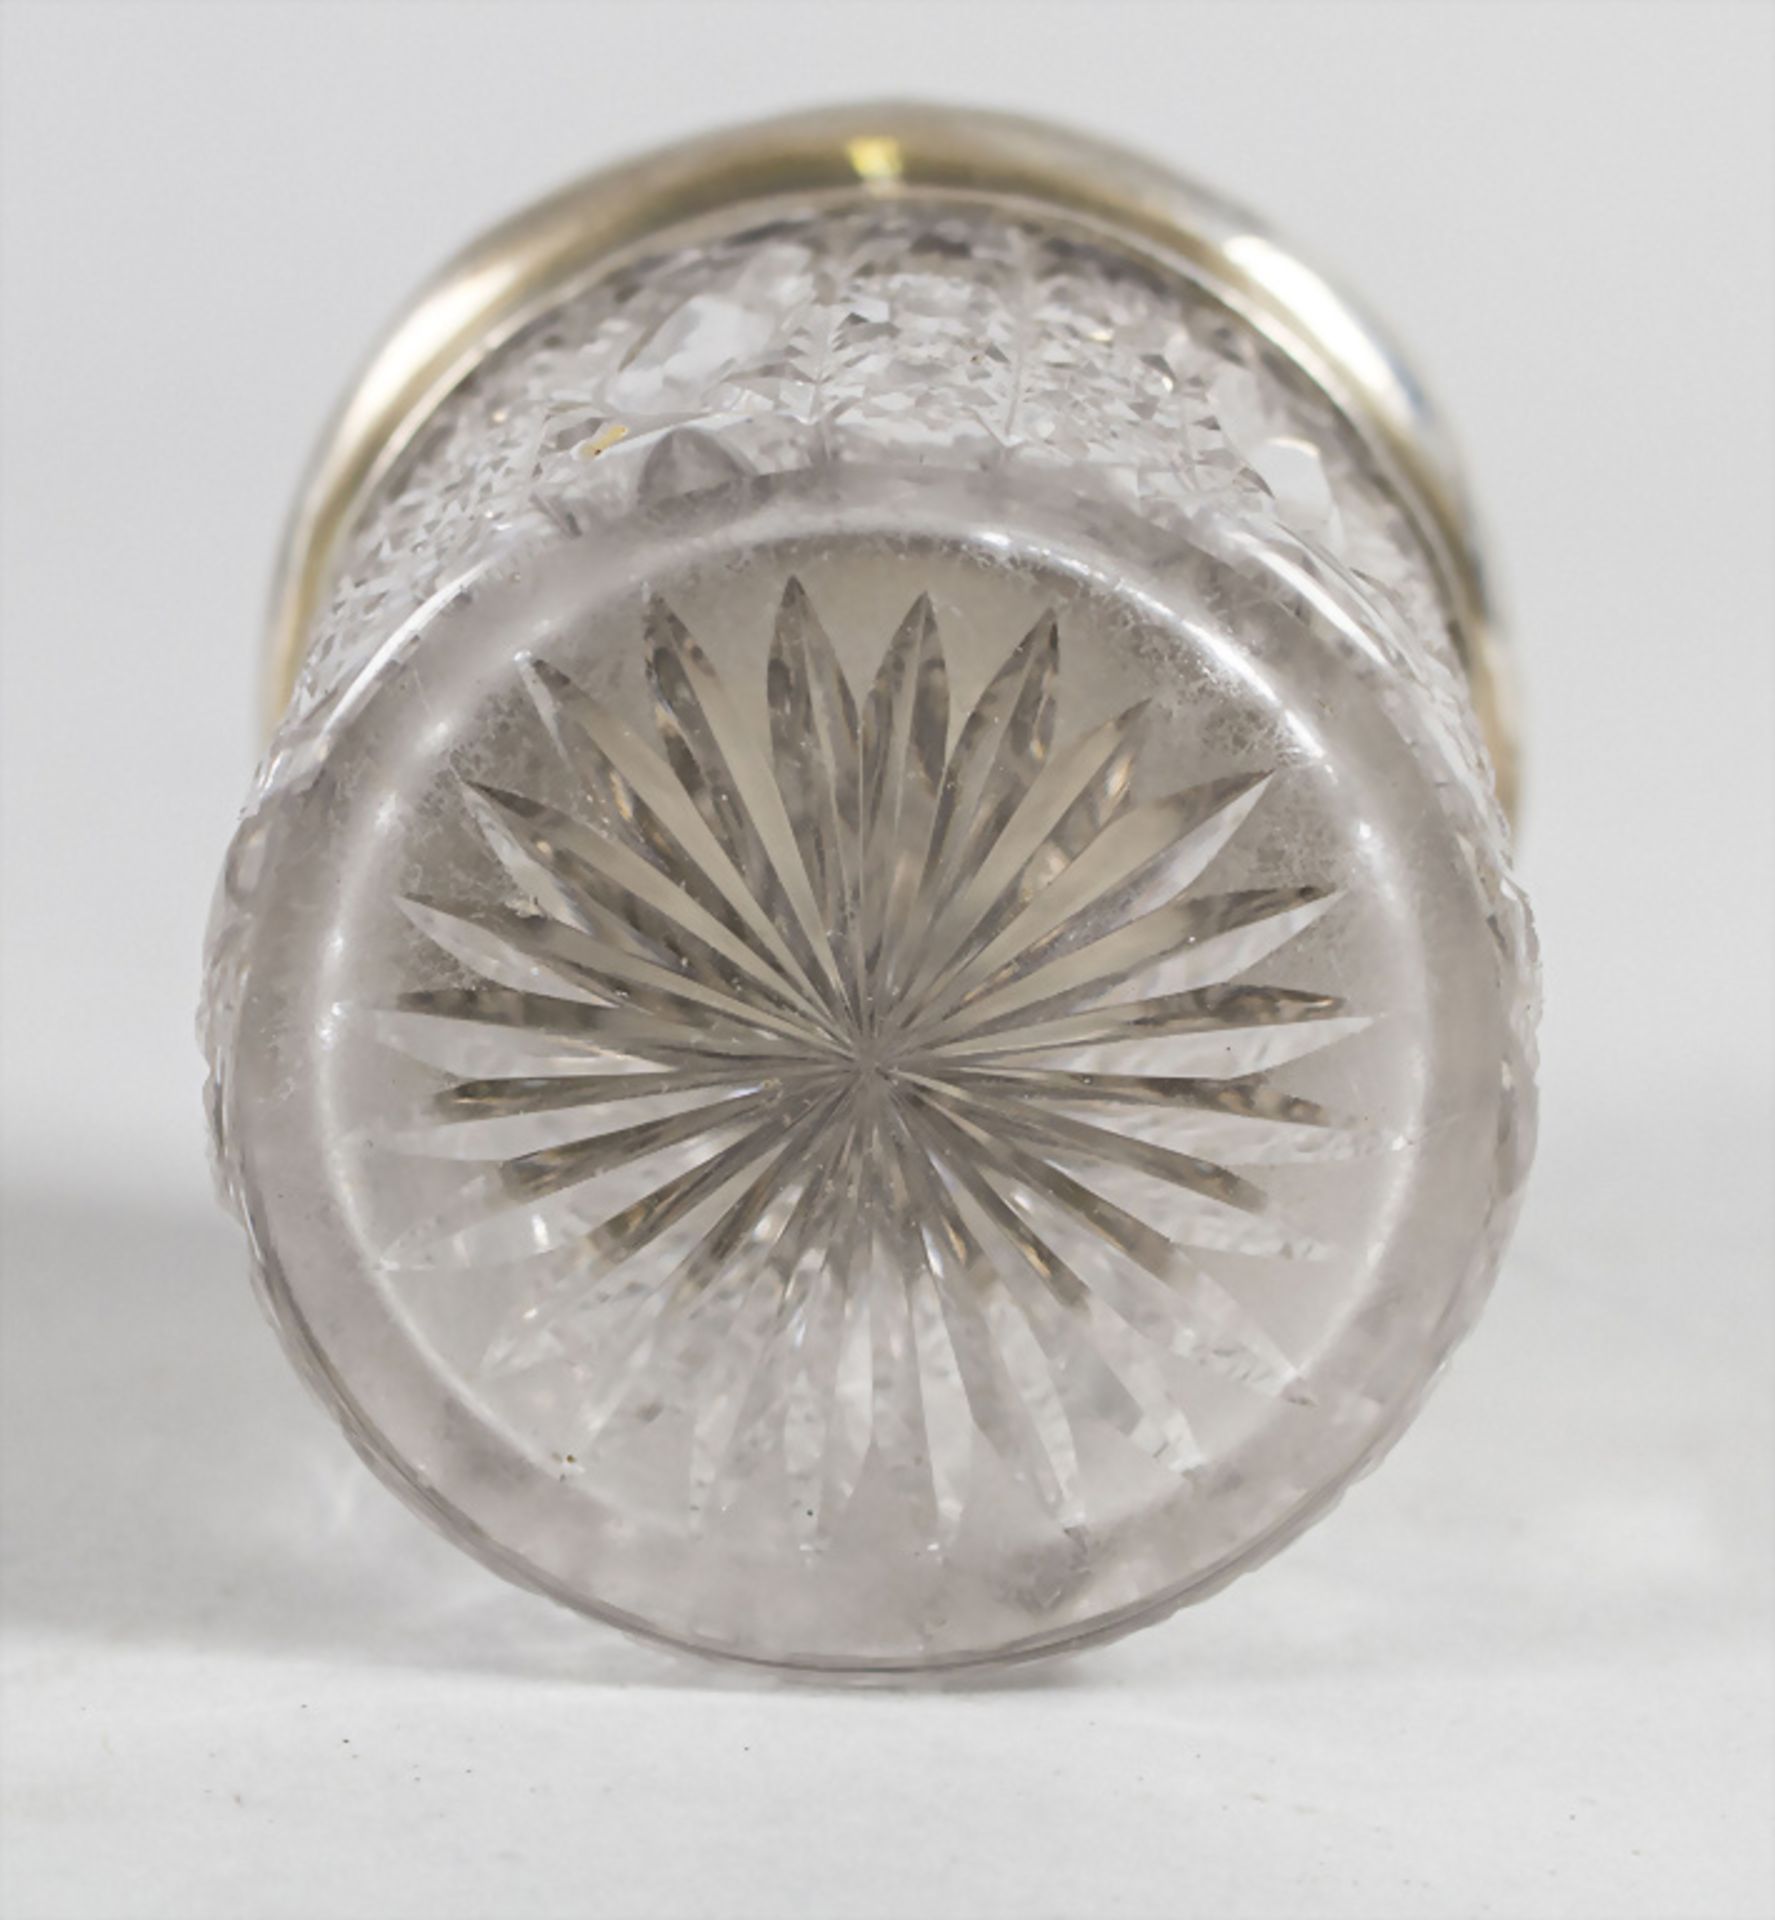 Glasdose mit Silberdeckel / A cut glass dresser jar with silver lid, Florence Warden, Chester, 1896 - Image 3 of 4